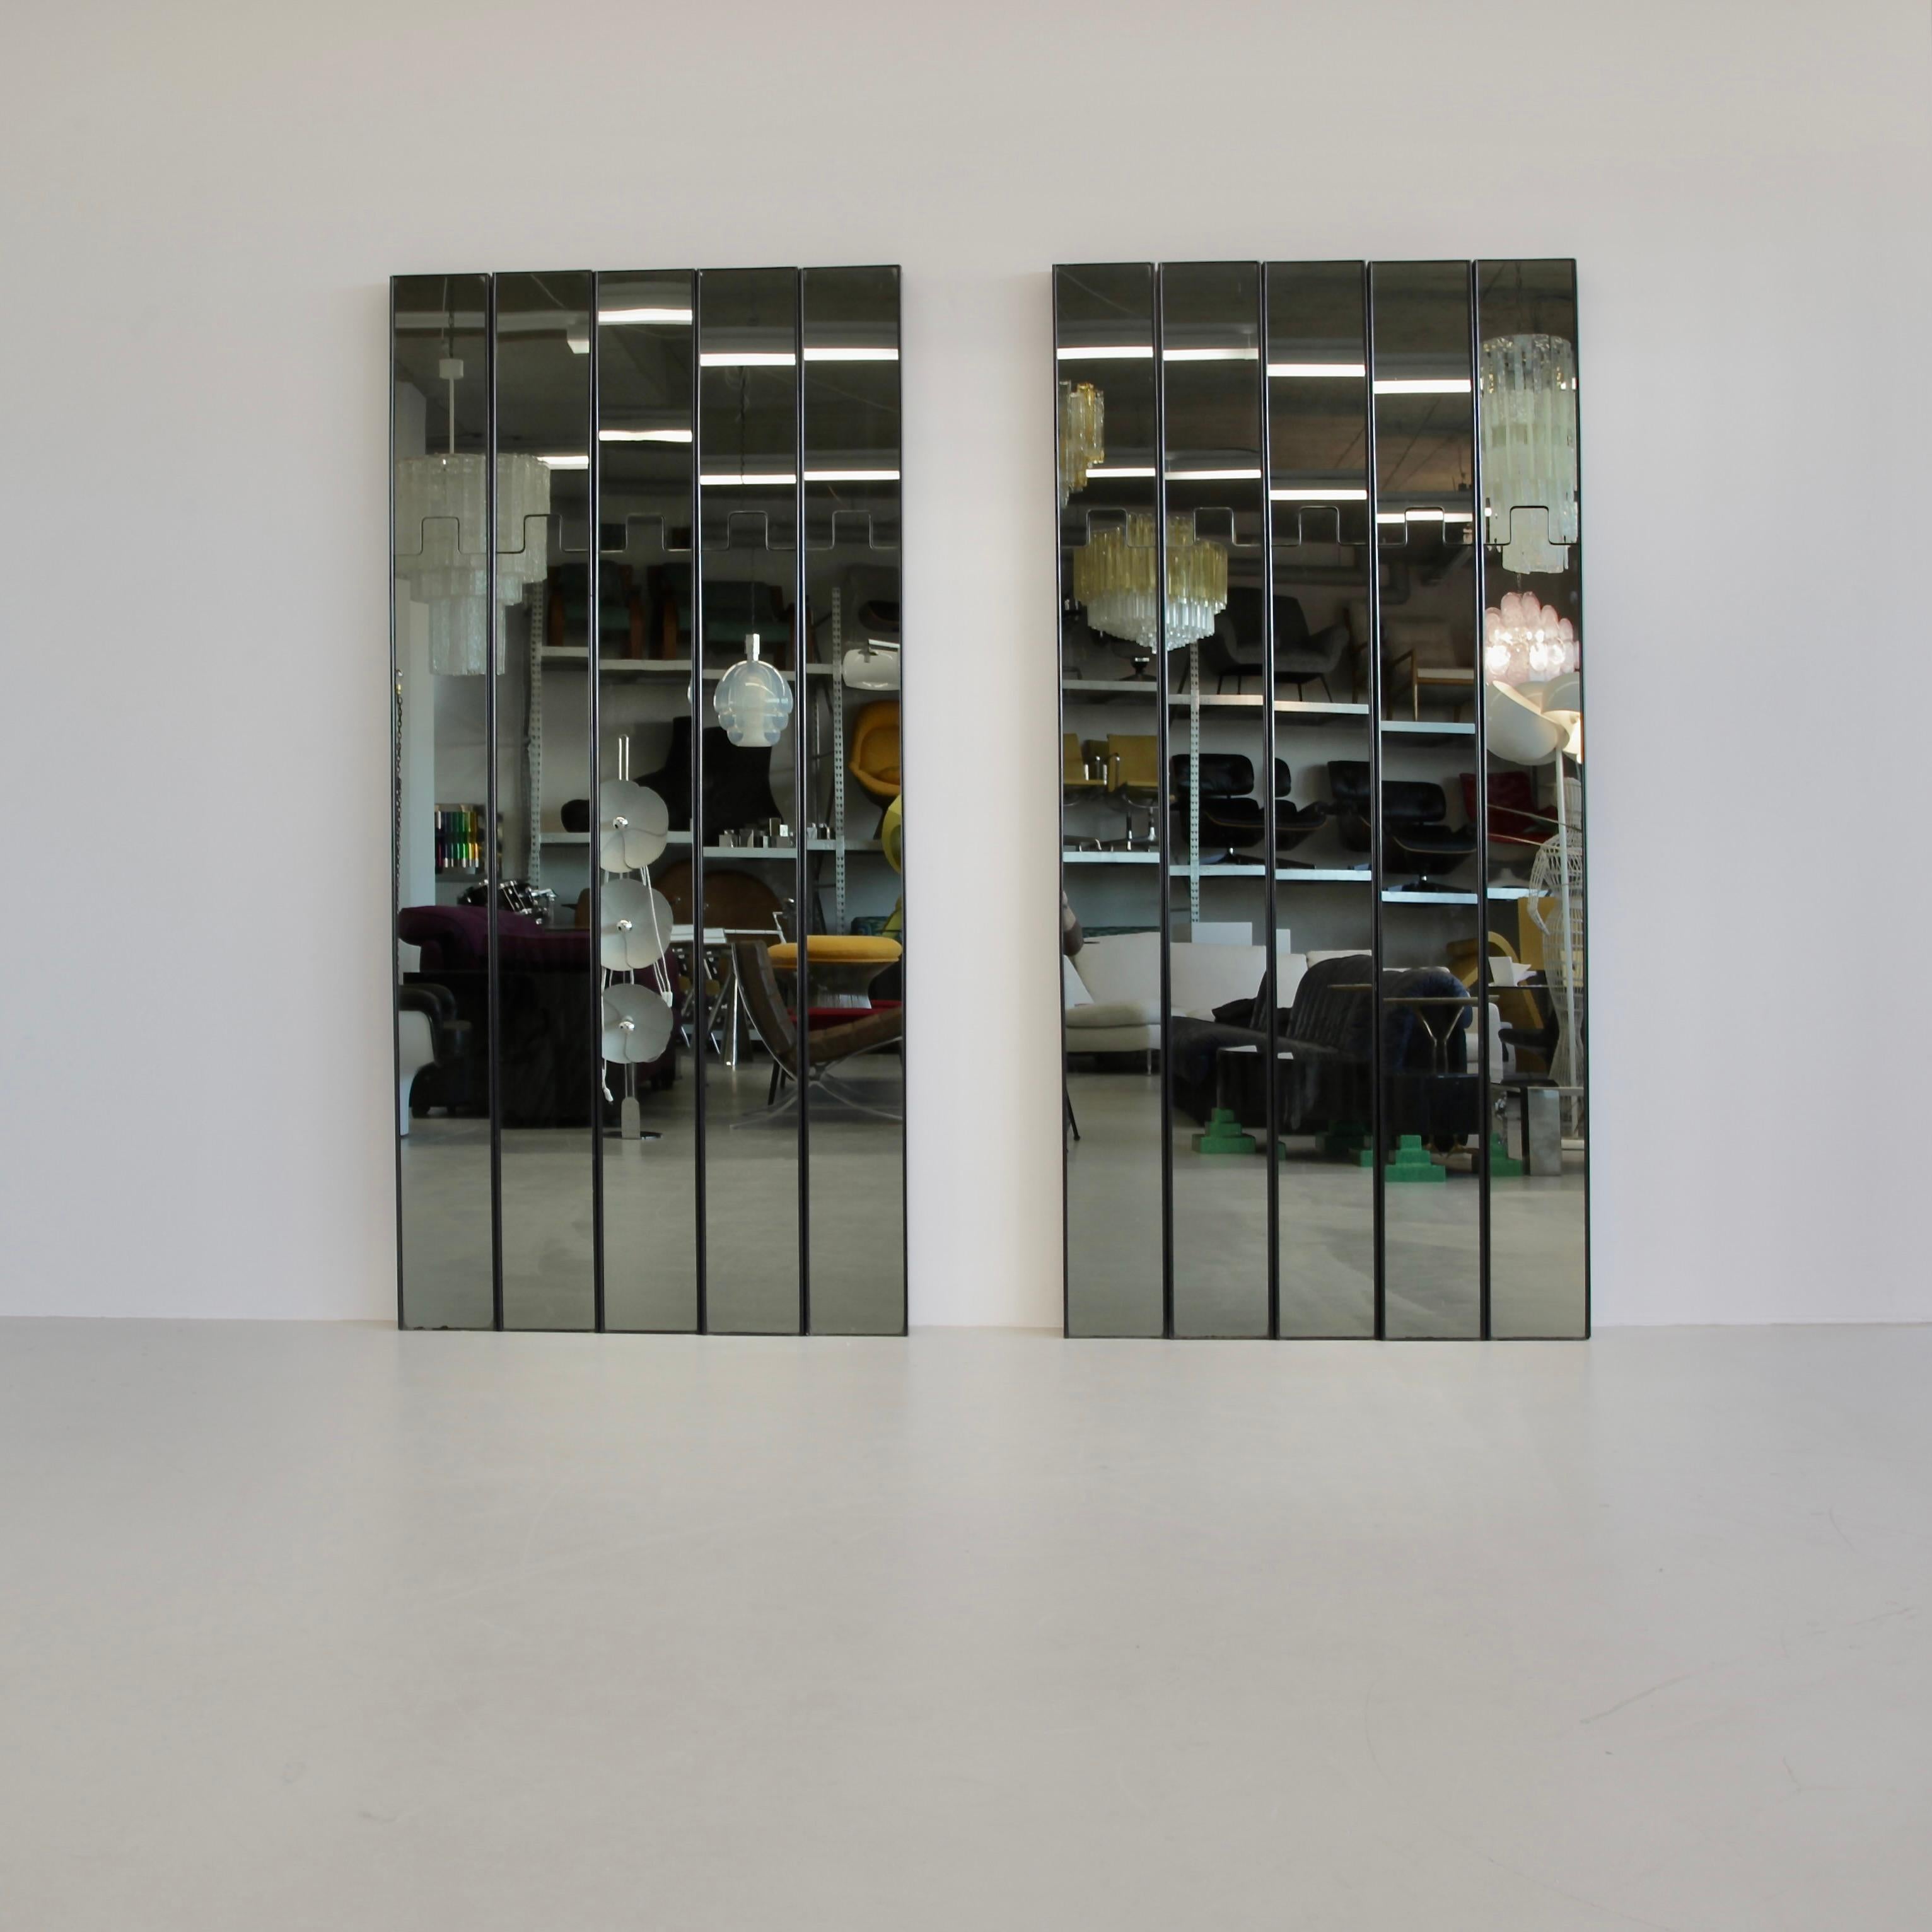 Modular mirror system (Gronda), designed by Bertoncini (they won a Red Dot award in 1972) under the artistic direction of Joe COLOMBO. Wall mirrors, all of which have a coat rack, through using a movable recess. Brackets for hanging the mirrors are